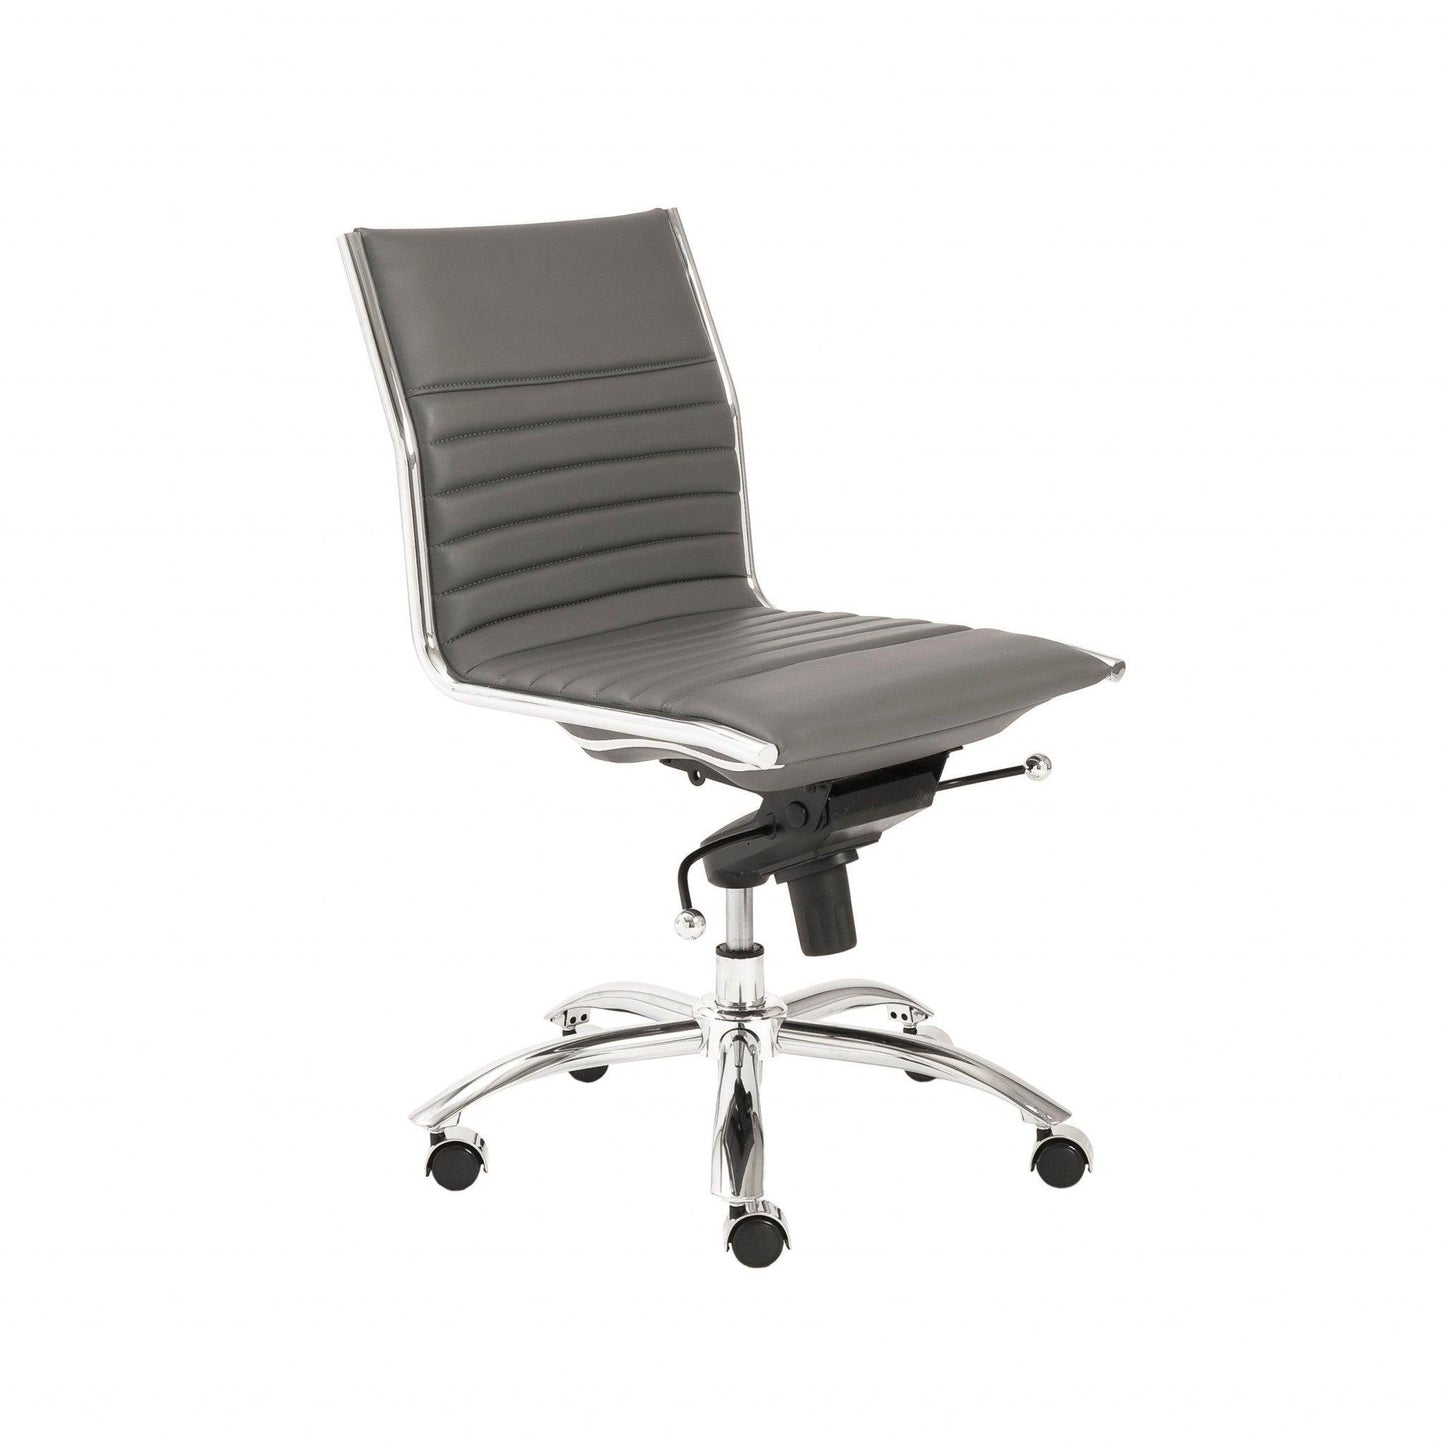 26.38" X 25.99" X 38.19" Low Back Office Chair without Armrests in Gray with Chromed Steel Base - AFS